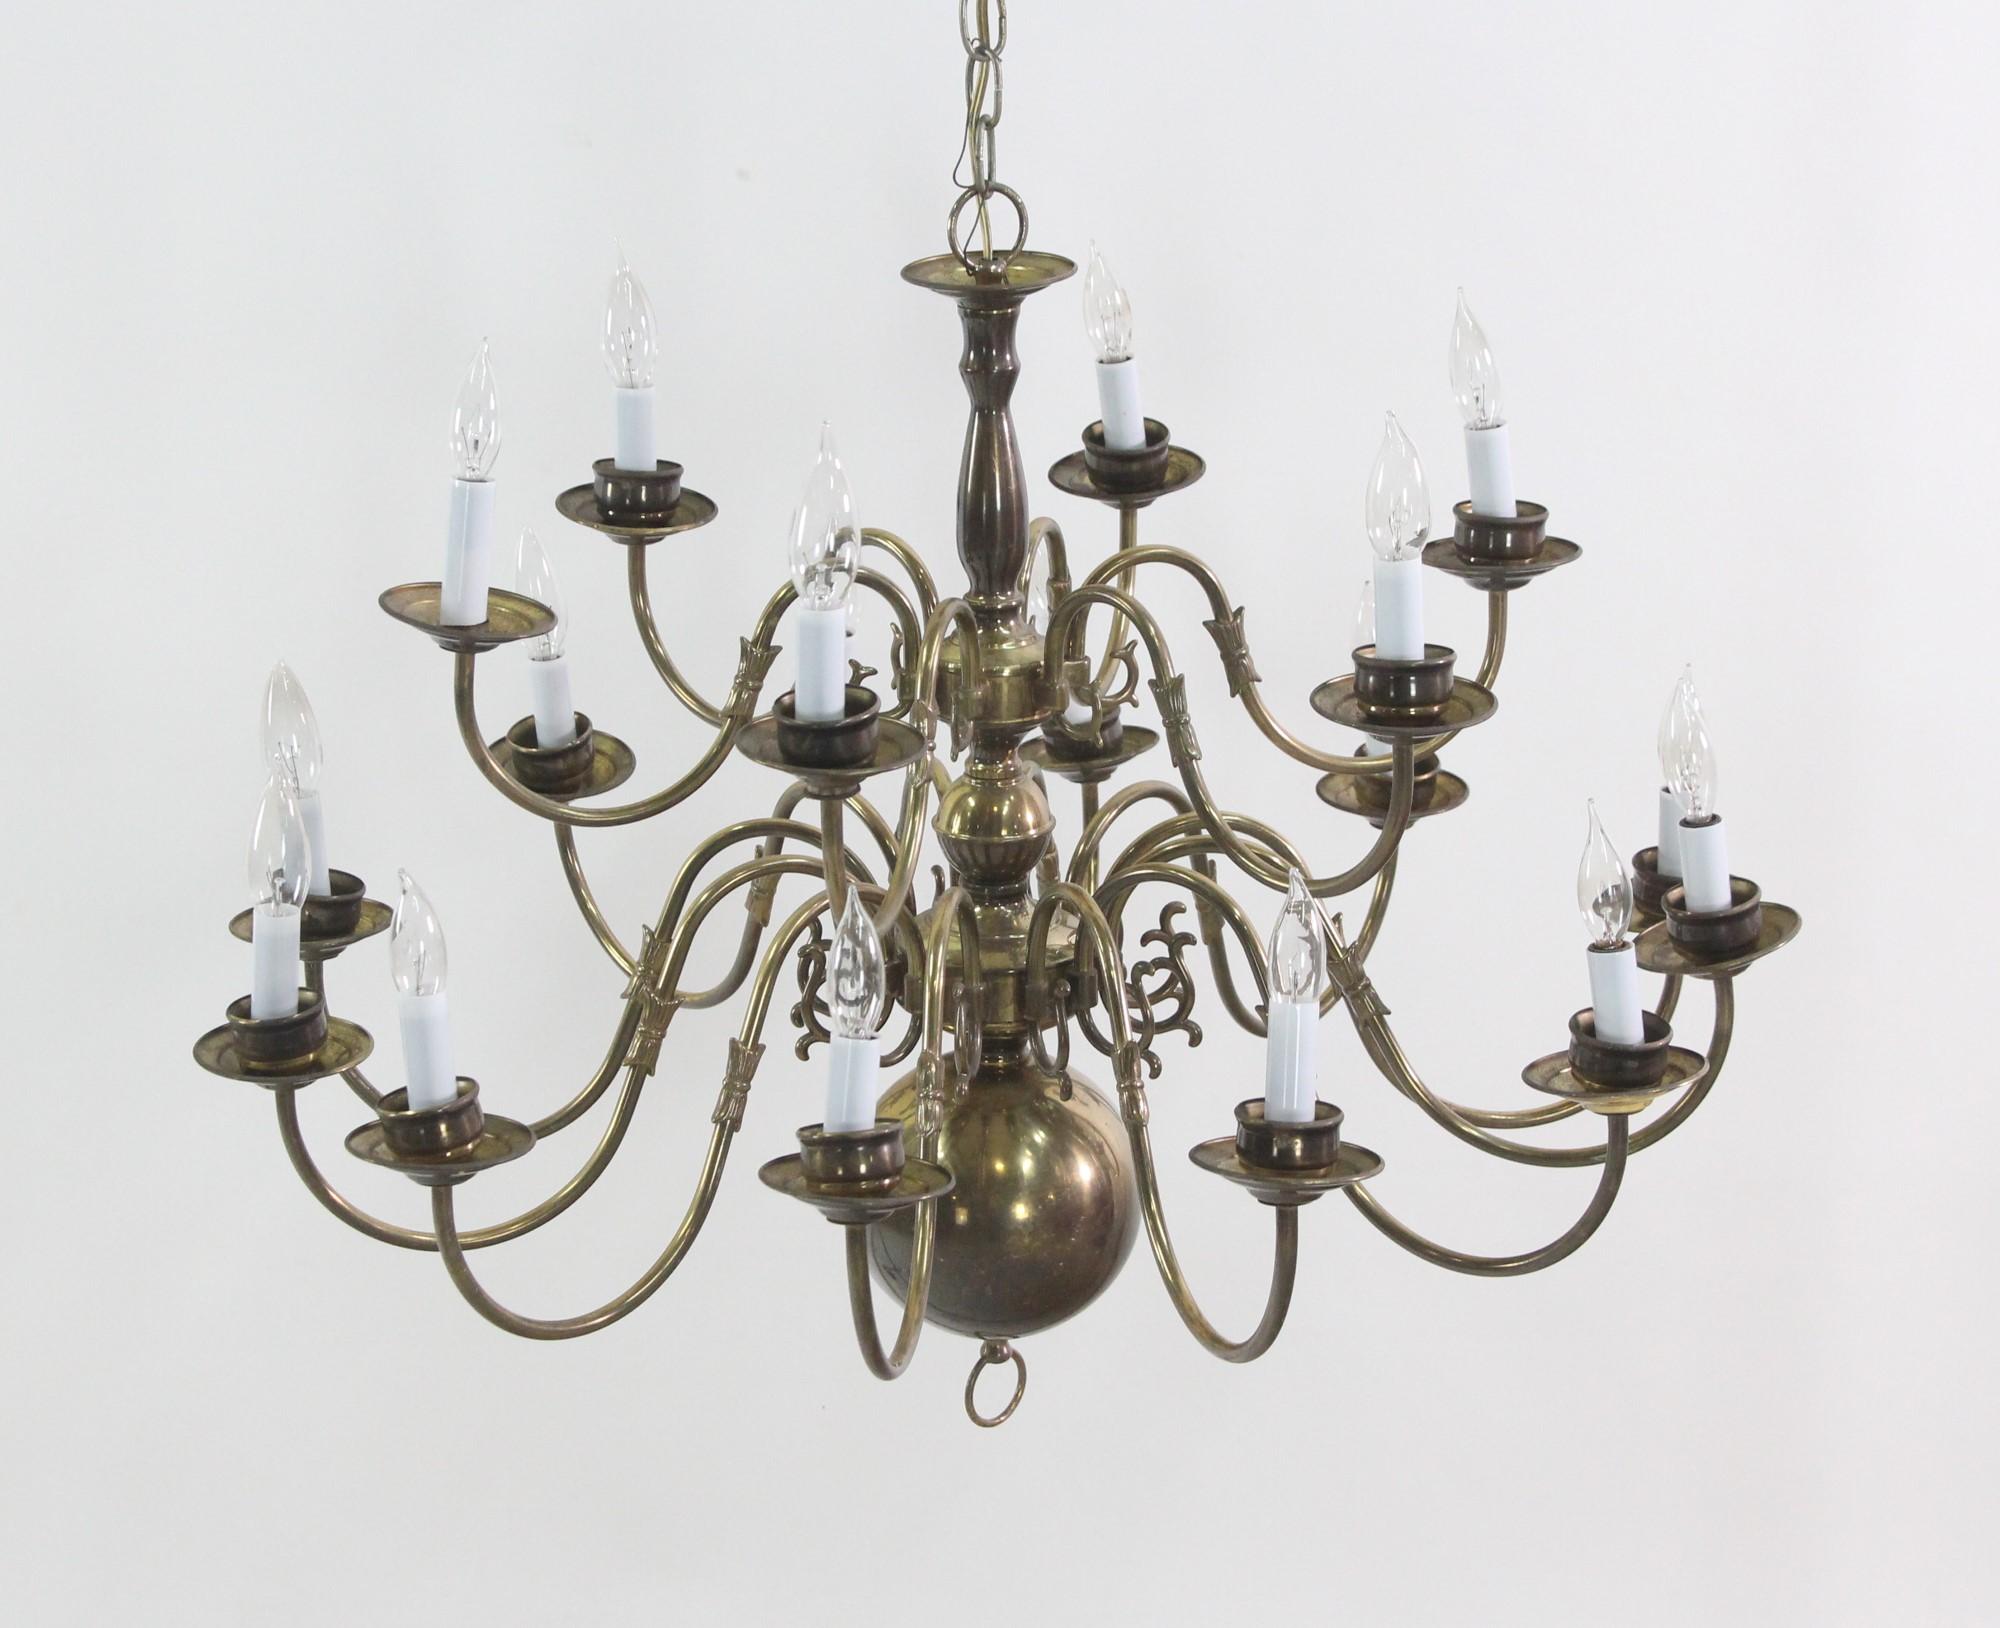 Colonial Revival Early 1900s Brass Williamsburg Style Chandelier with 18 Arms and Lights